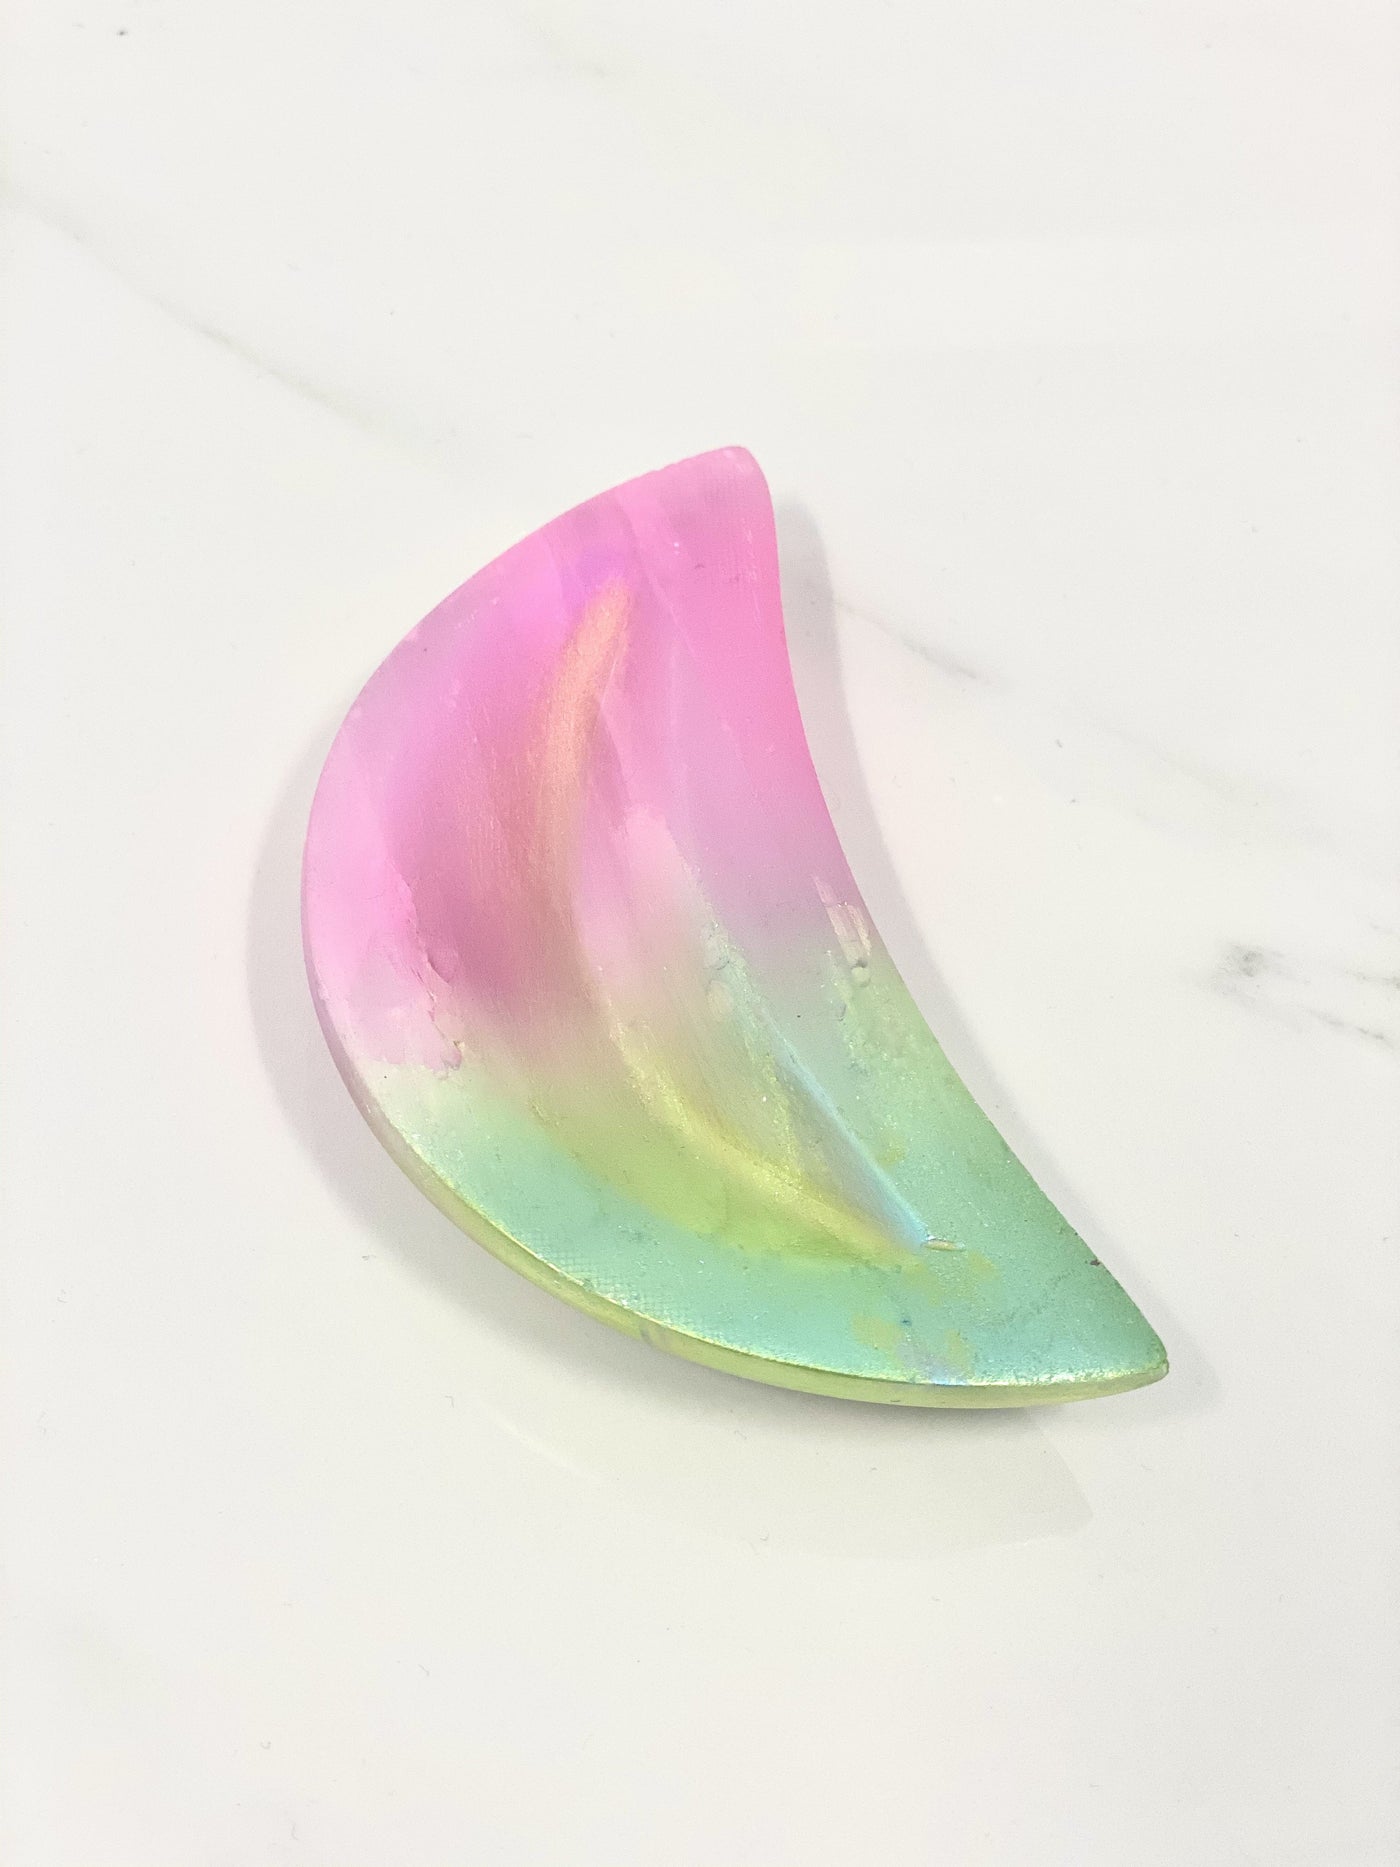 "Embrace Cosmic Beauty with our Pink/Green Dyed Aura Selenite Moons"